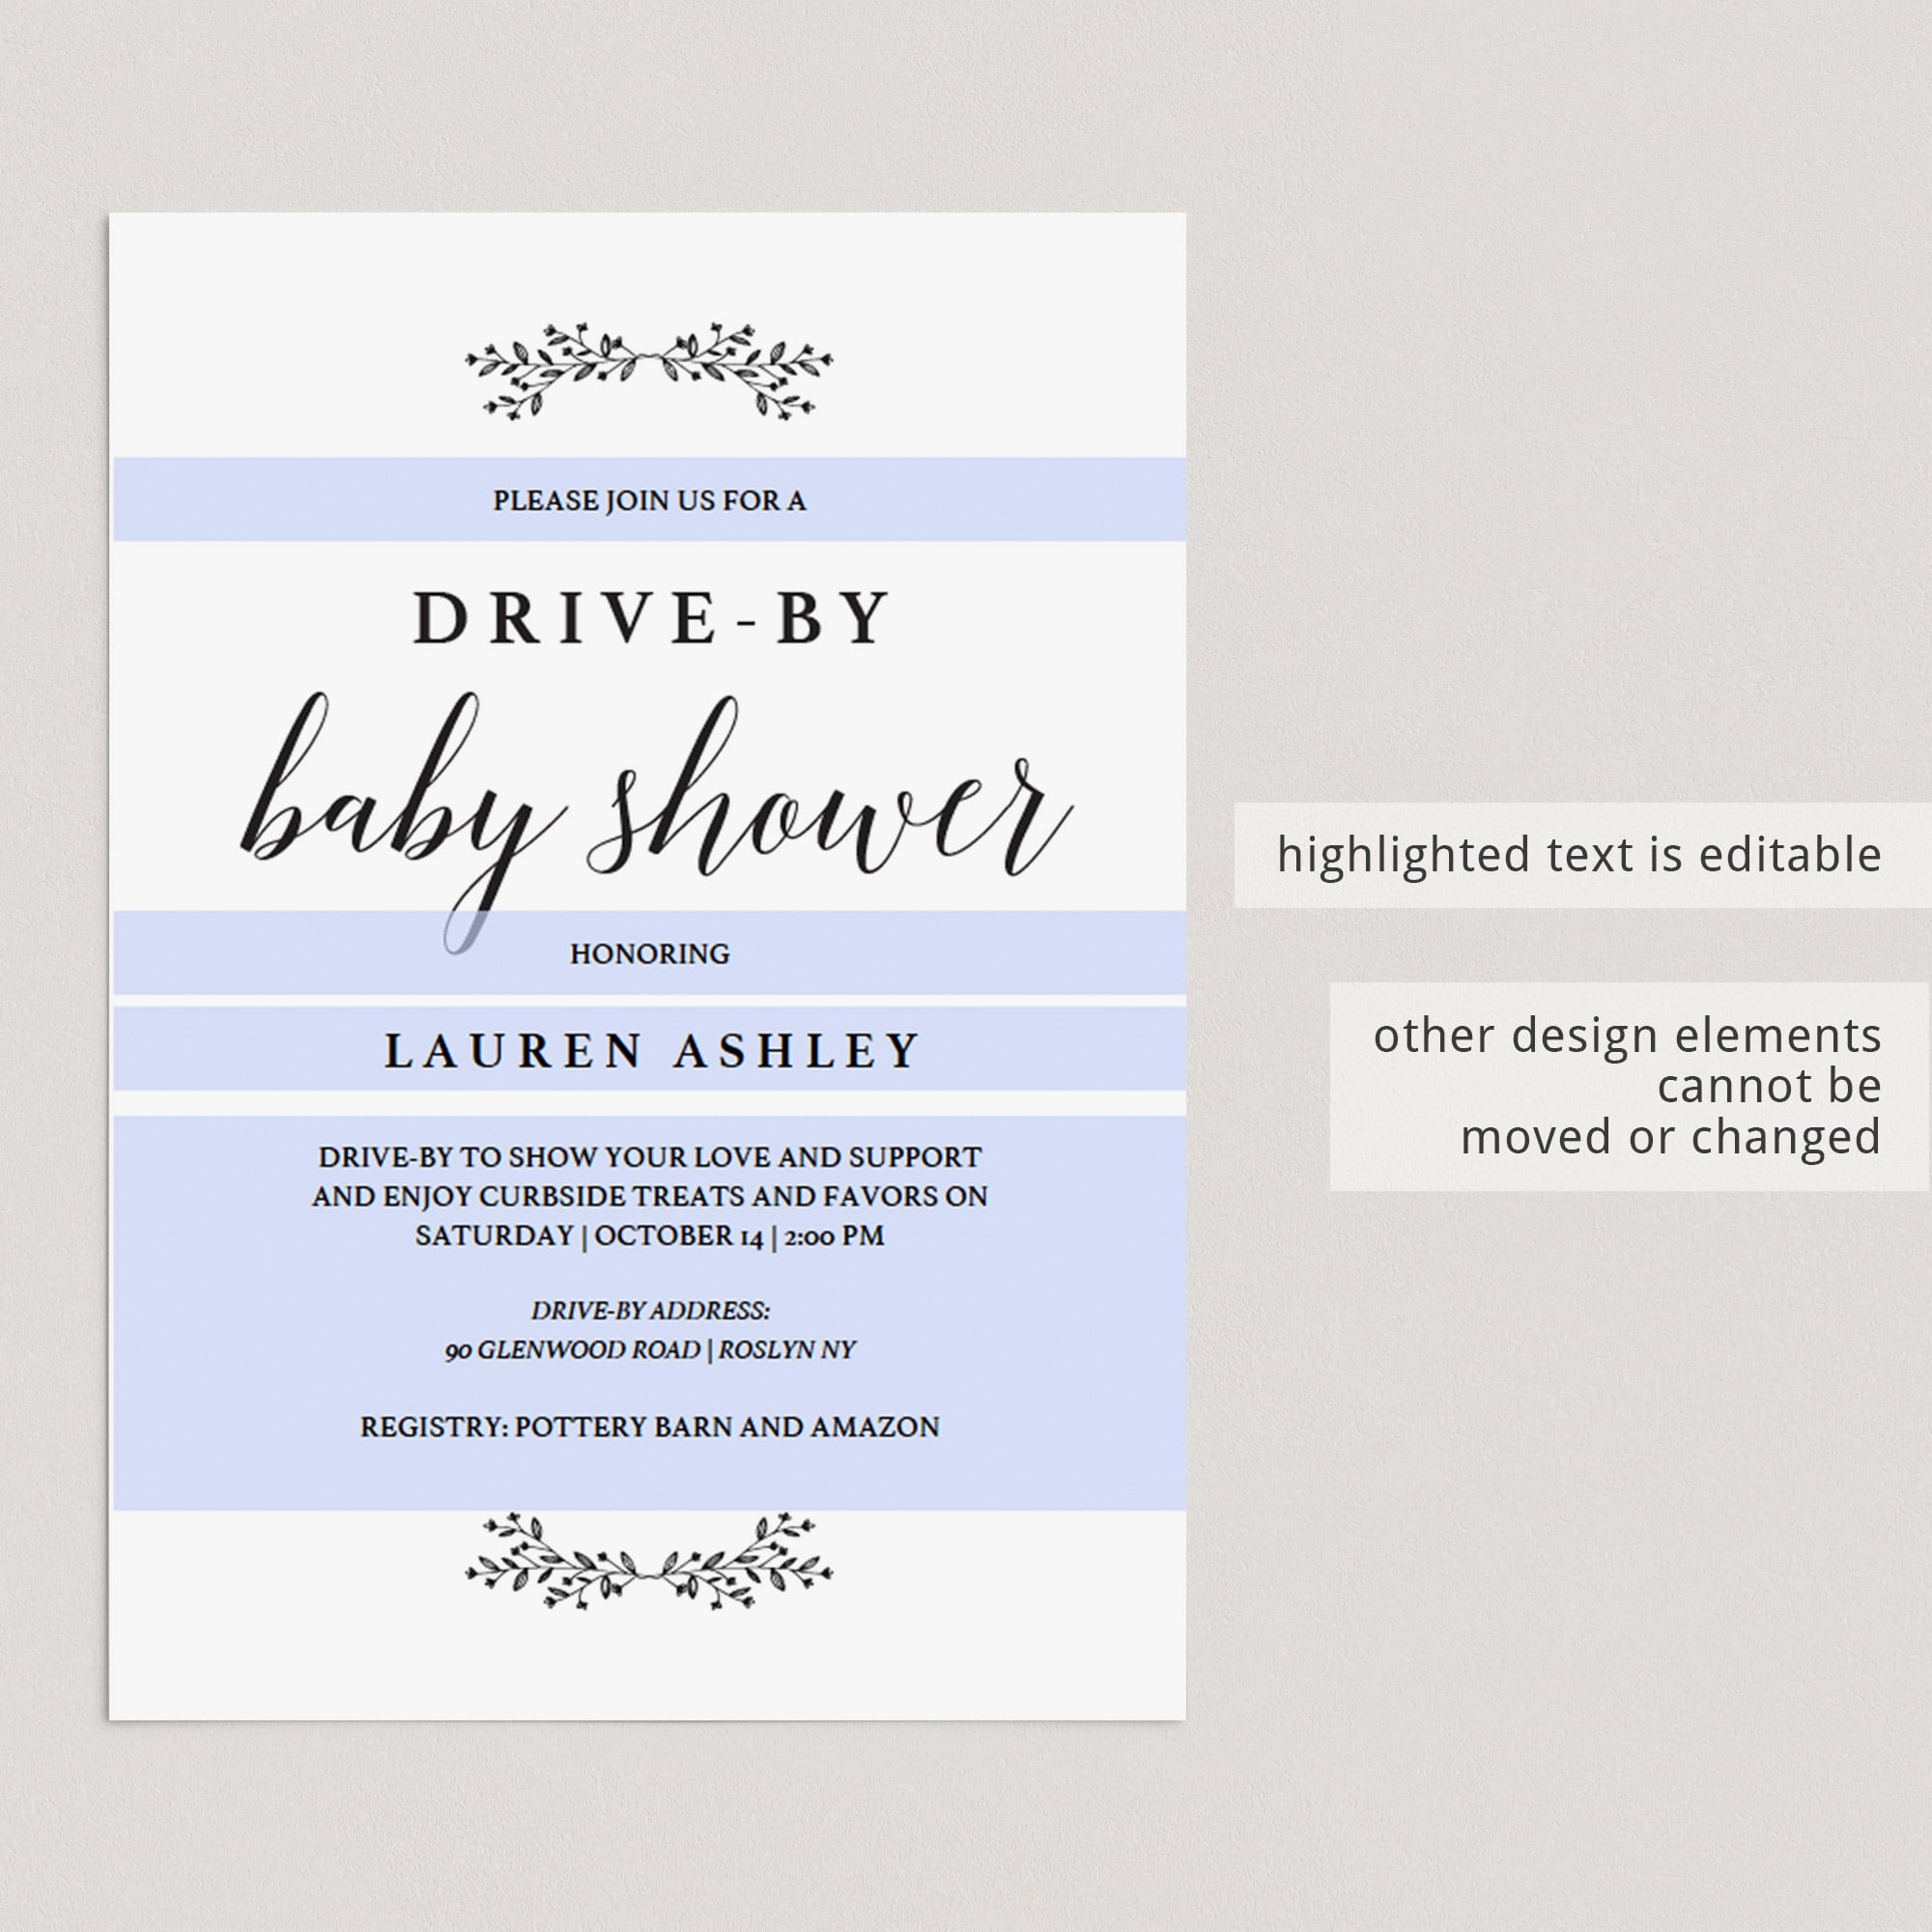 Editable drive-by baby shower invitations instant download by LittleSizzle